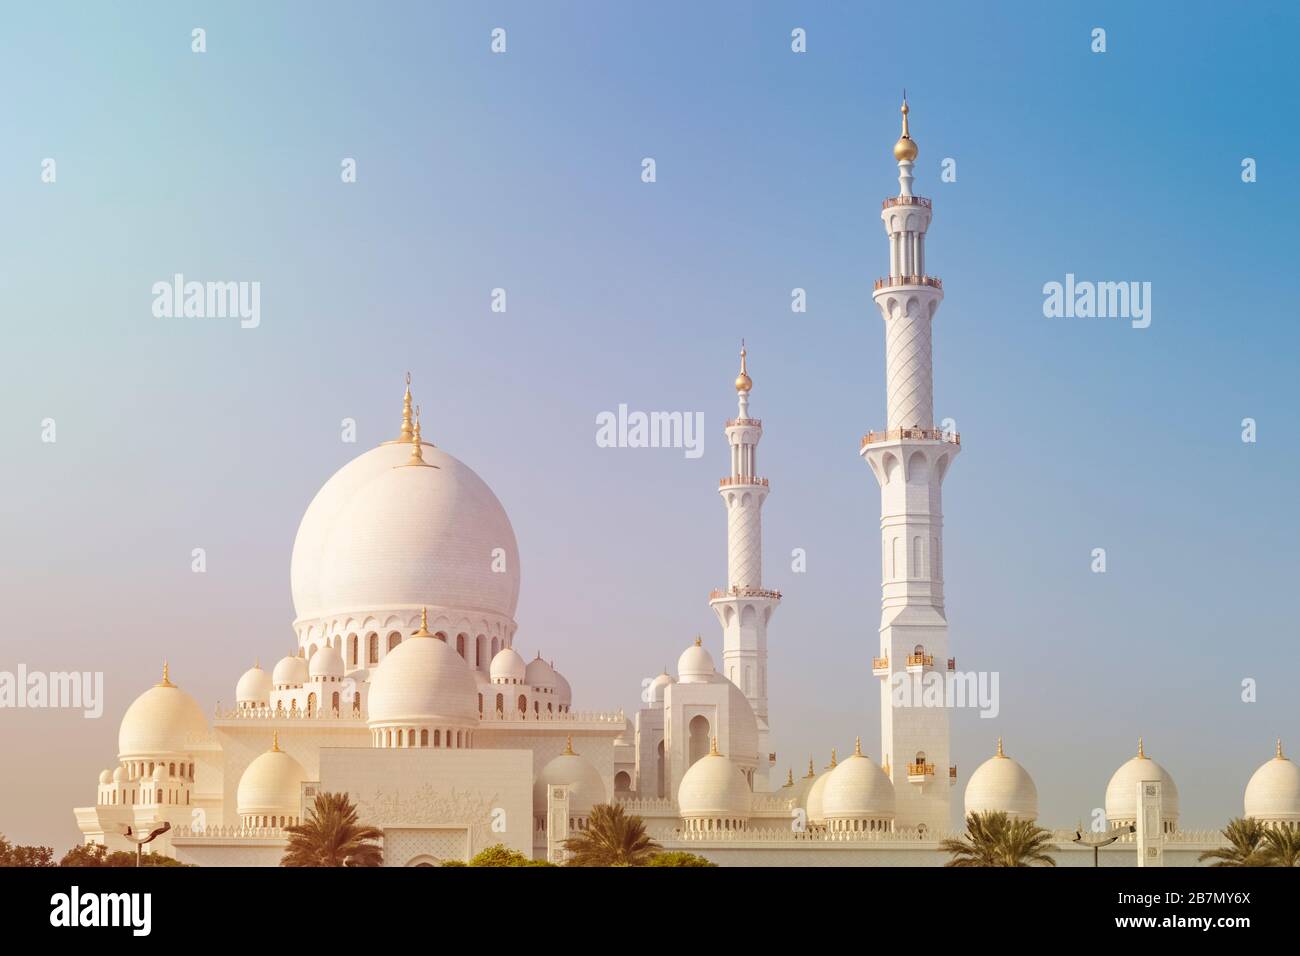 Beautiful view of the wonderful white mosque of Sheikh Zayed in Abu Dhabi against a clear sky on a sunny day Stock Photo